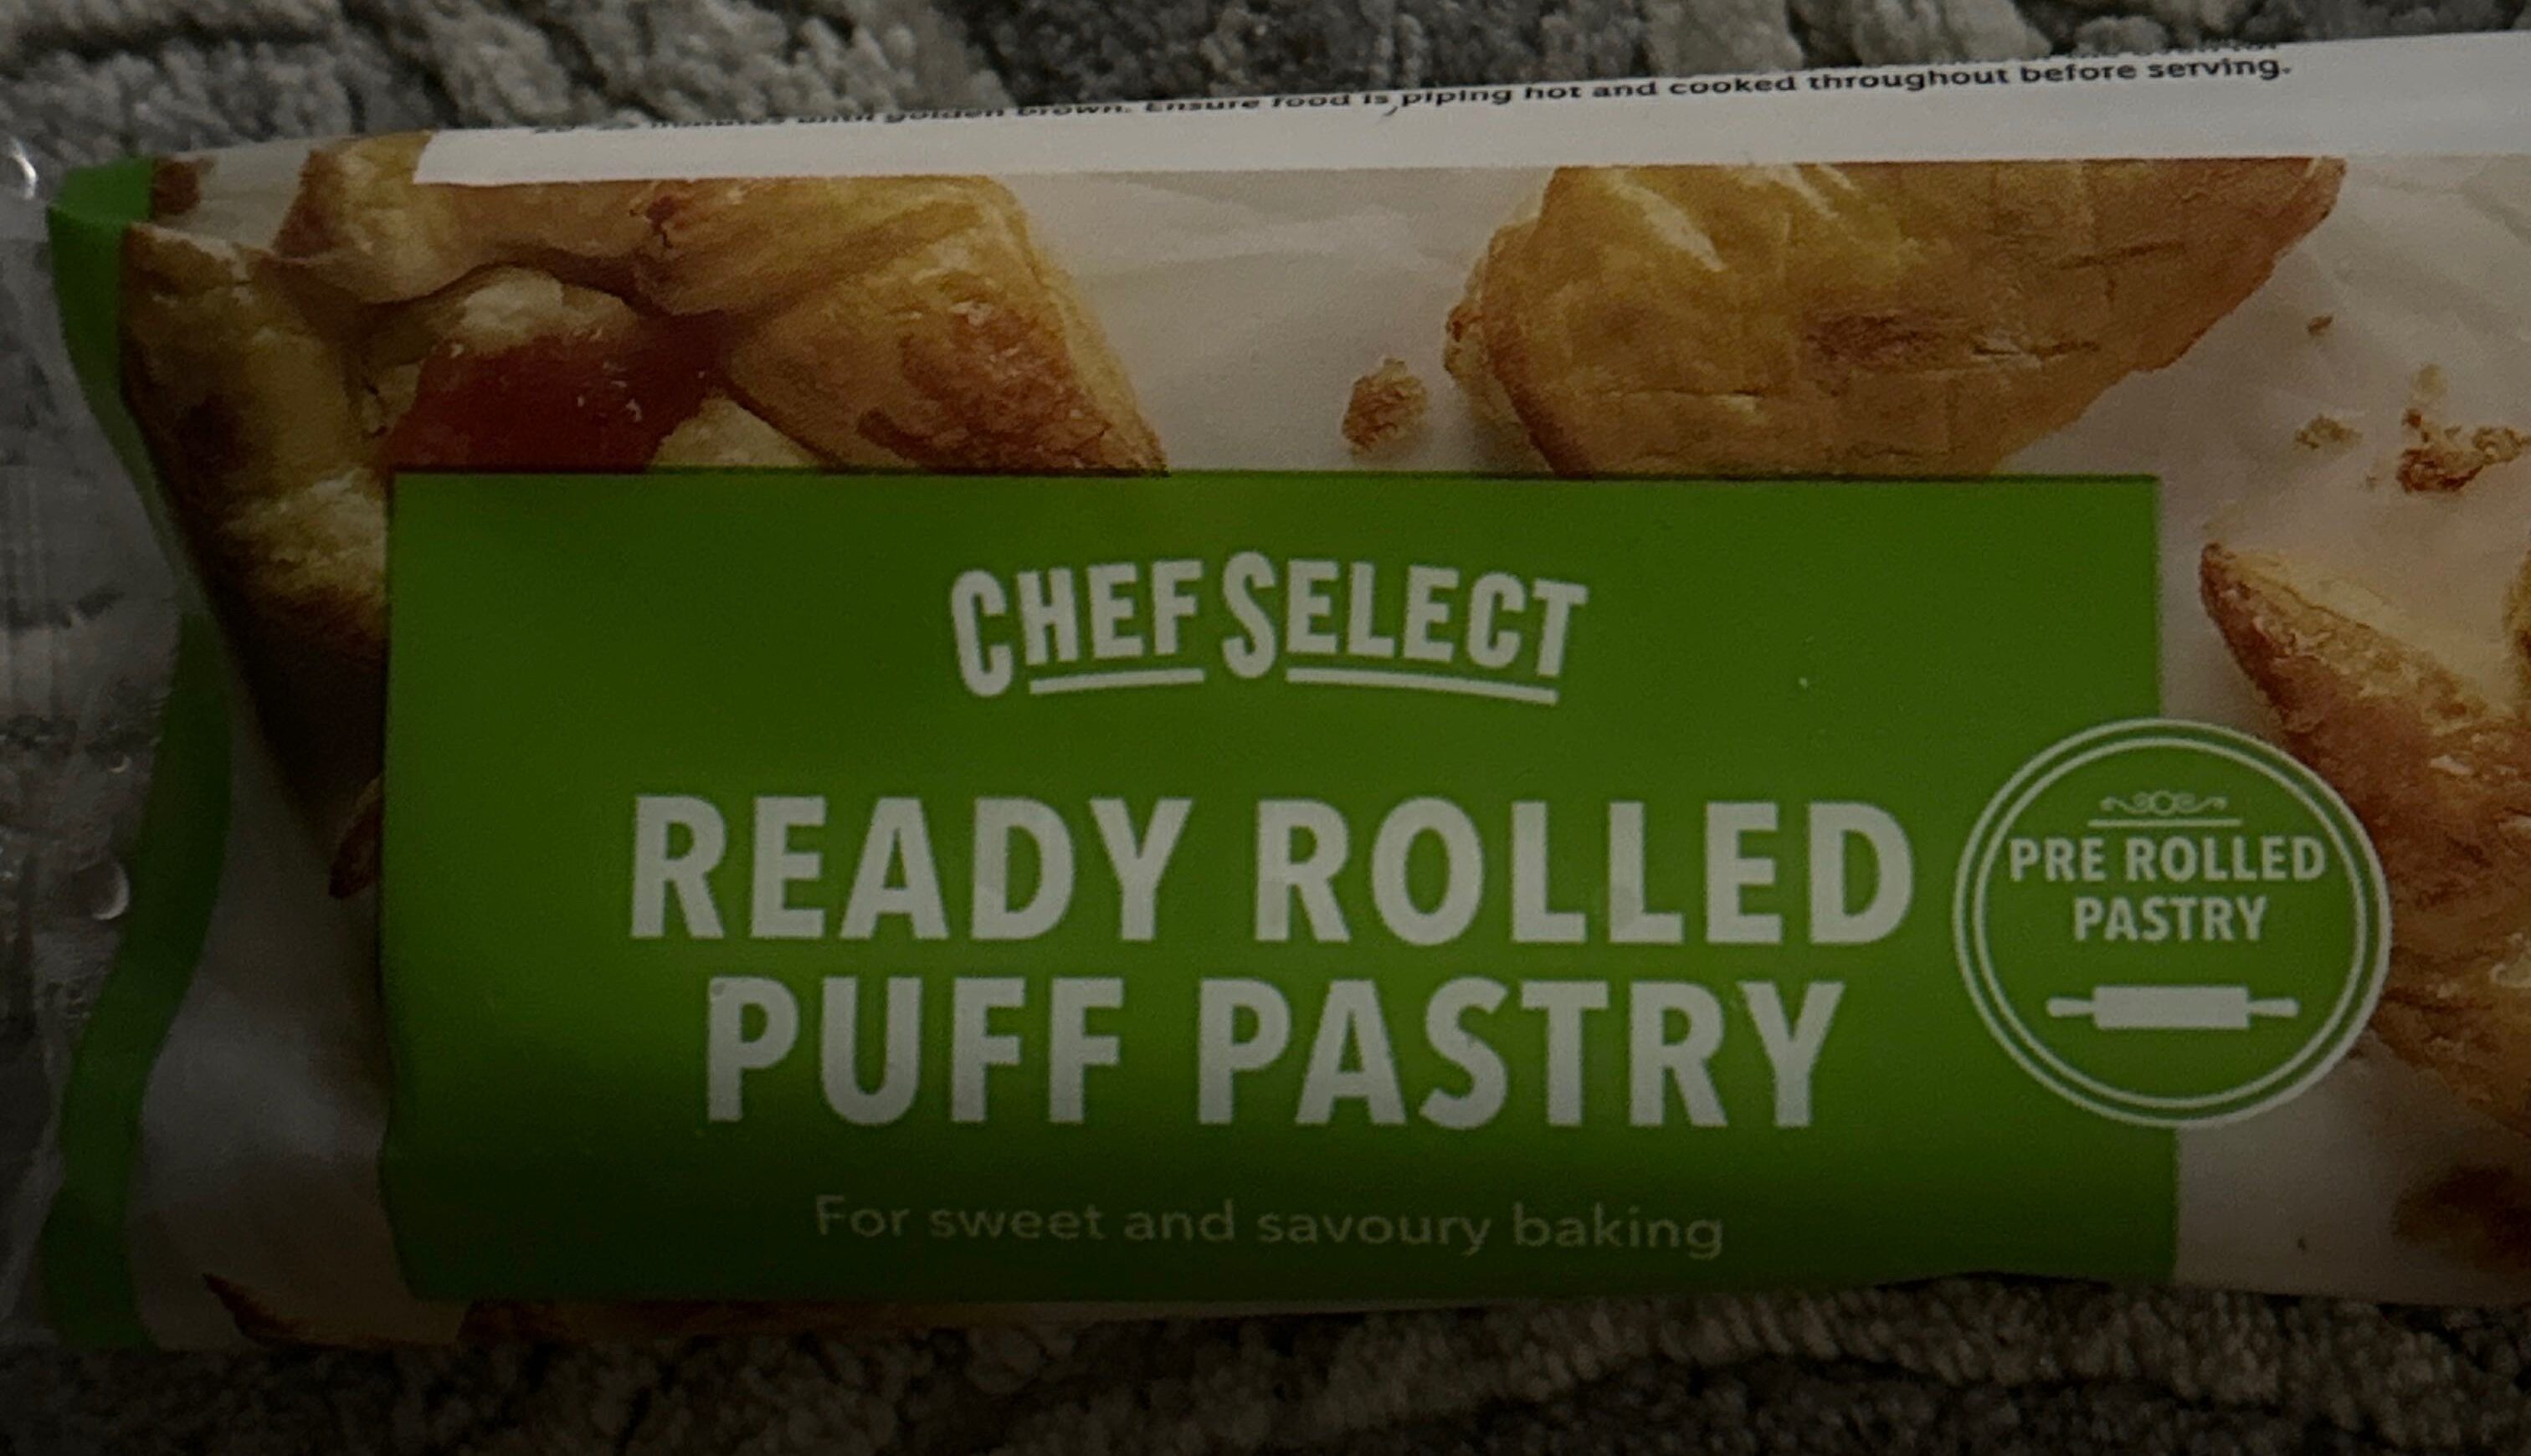 Chef Select Ready Rolled Puff Pastry 375g is not halal | Halal Check